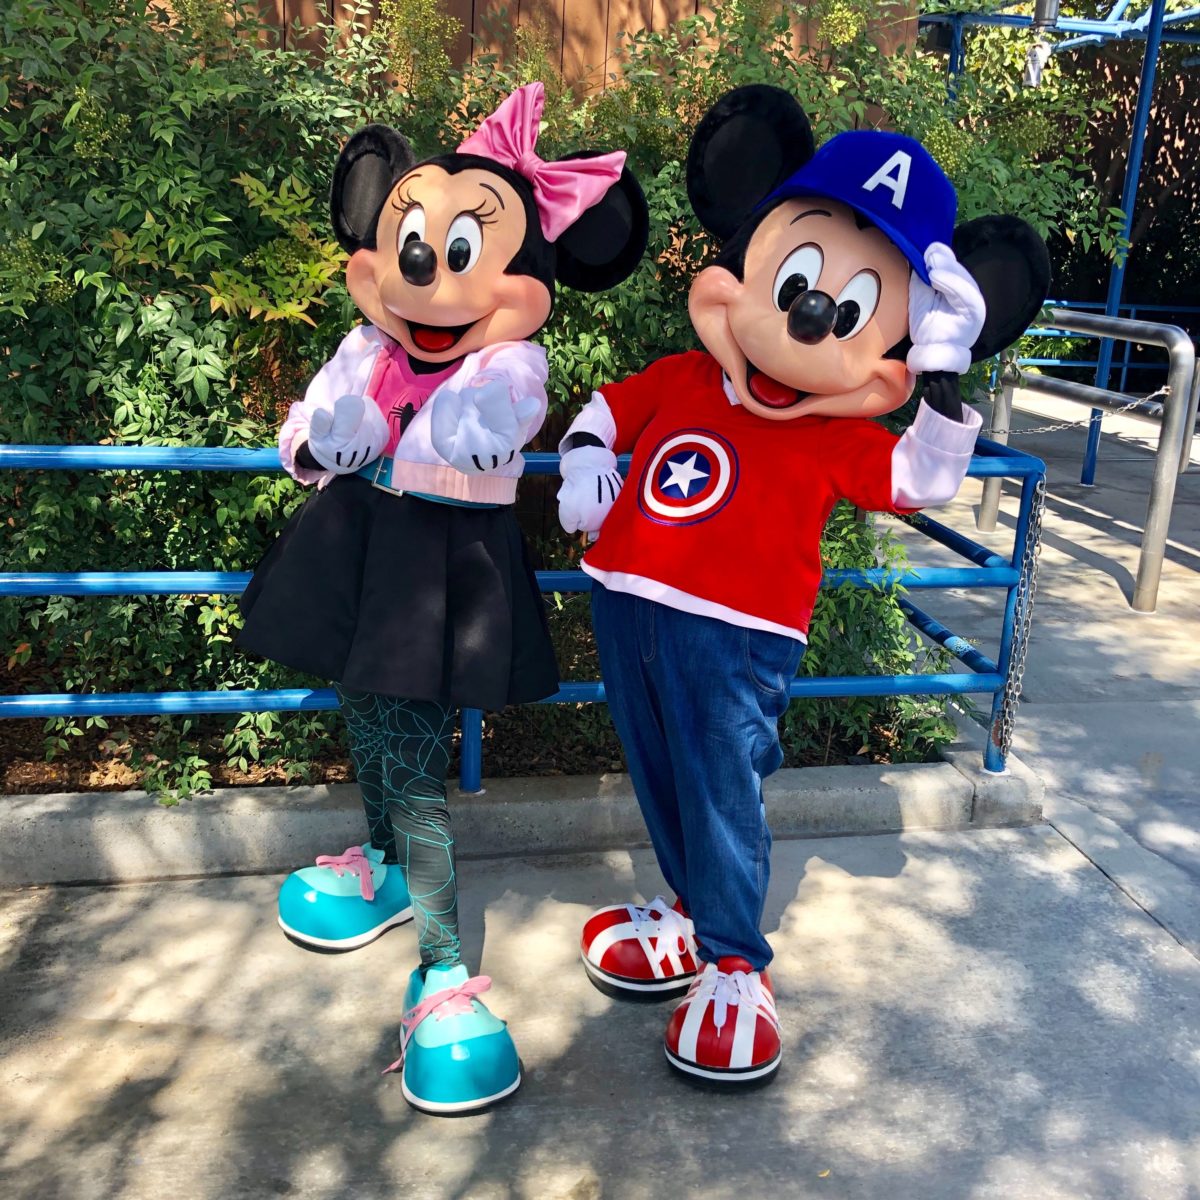 Photos Video Mickey And Minnie Mouse Dressed As Captain America And Spider Gwen Marvel Meet And Greet Debuts In Disney California Adventure Wdw News Today